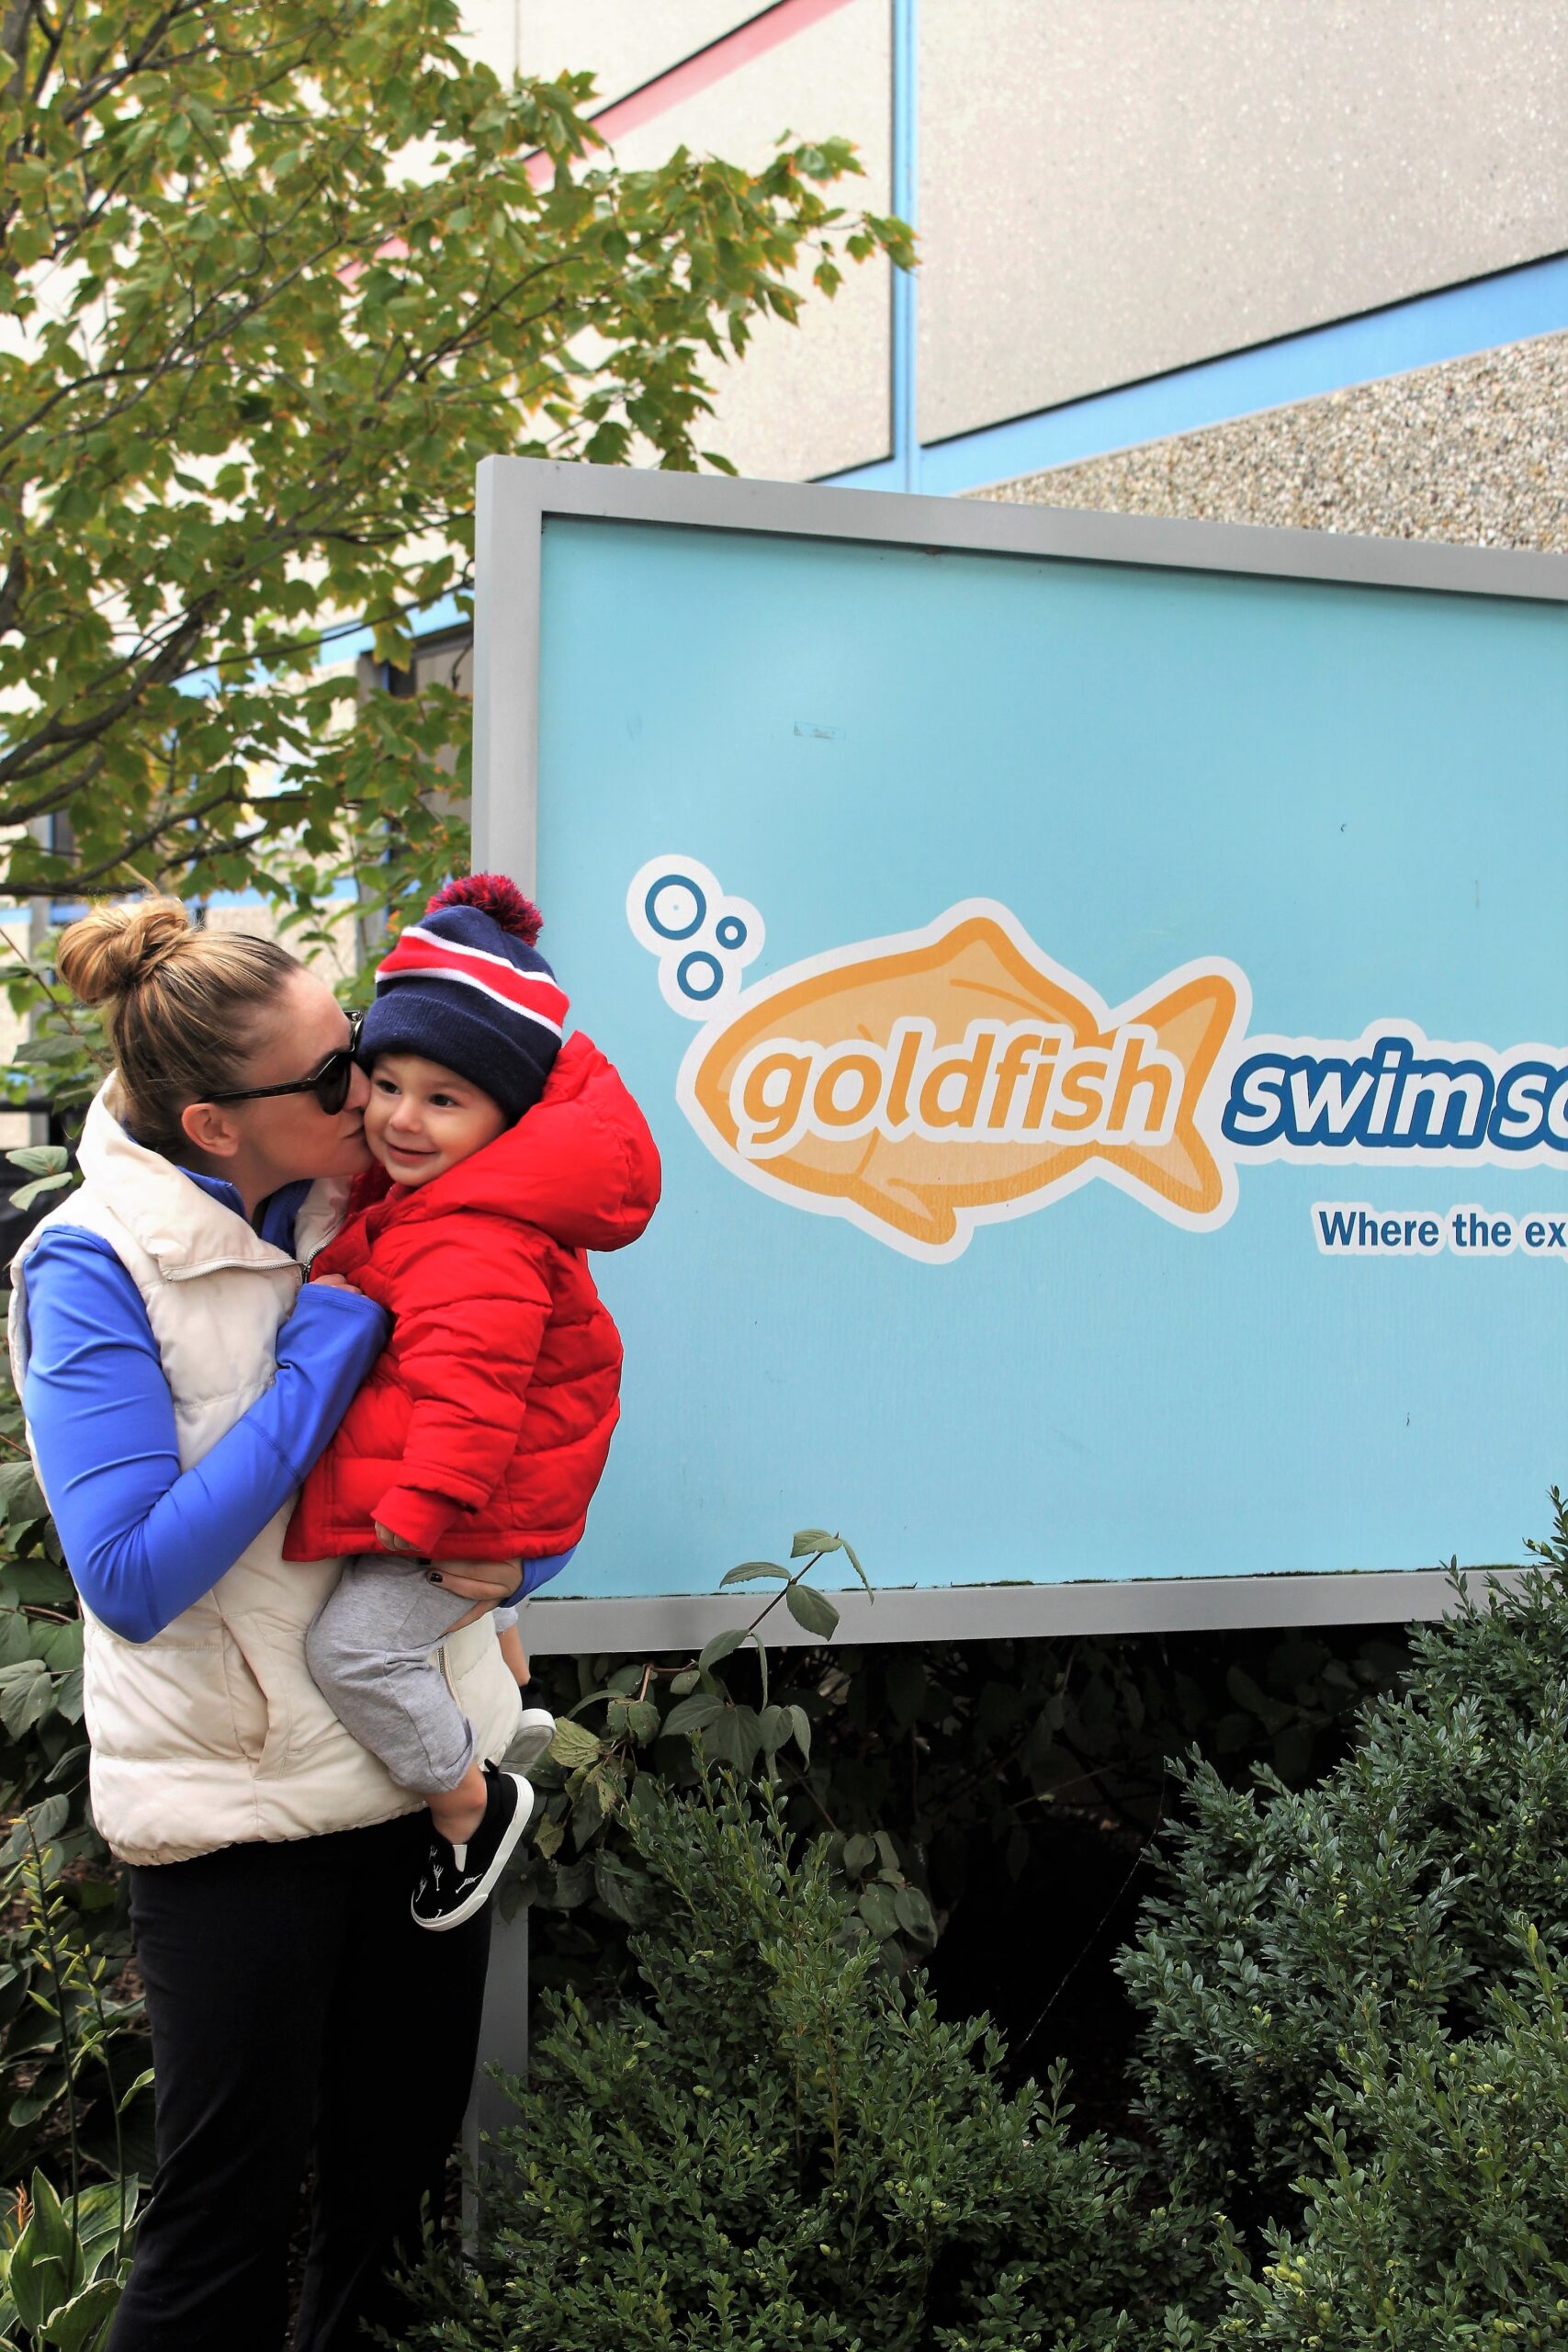 swimming lessons at Goldfish swim school. They are offering a great holiday package this year.